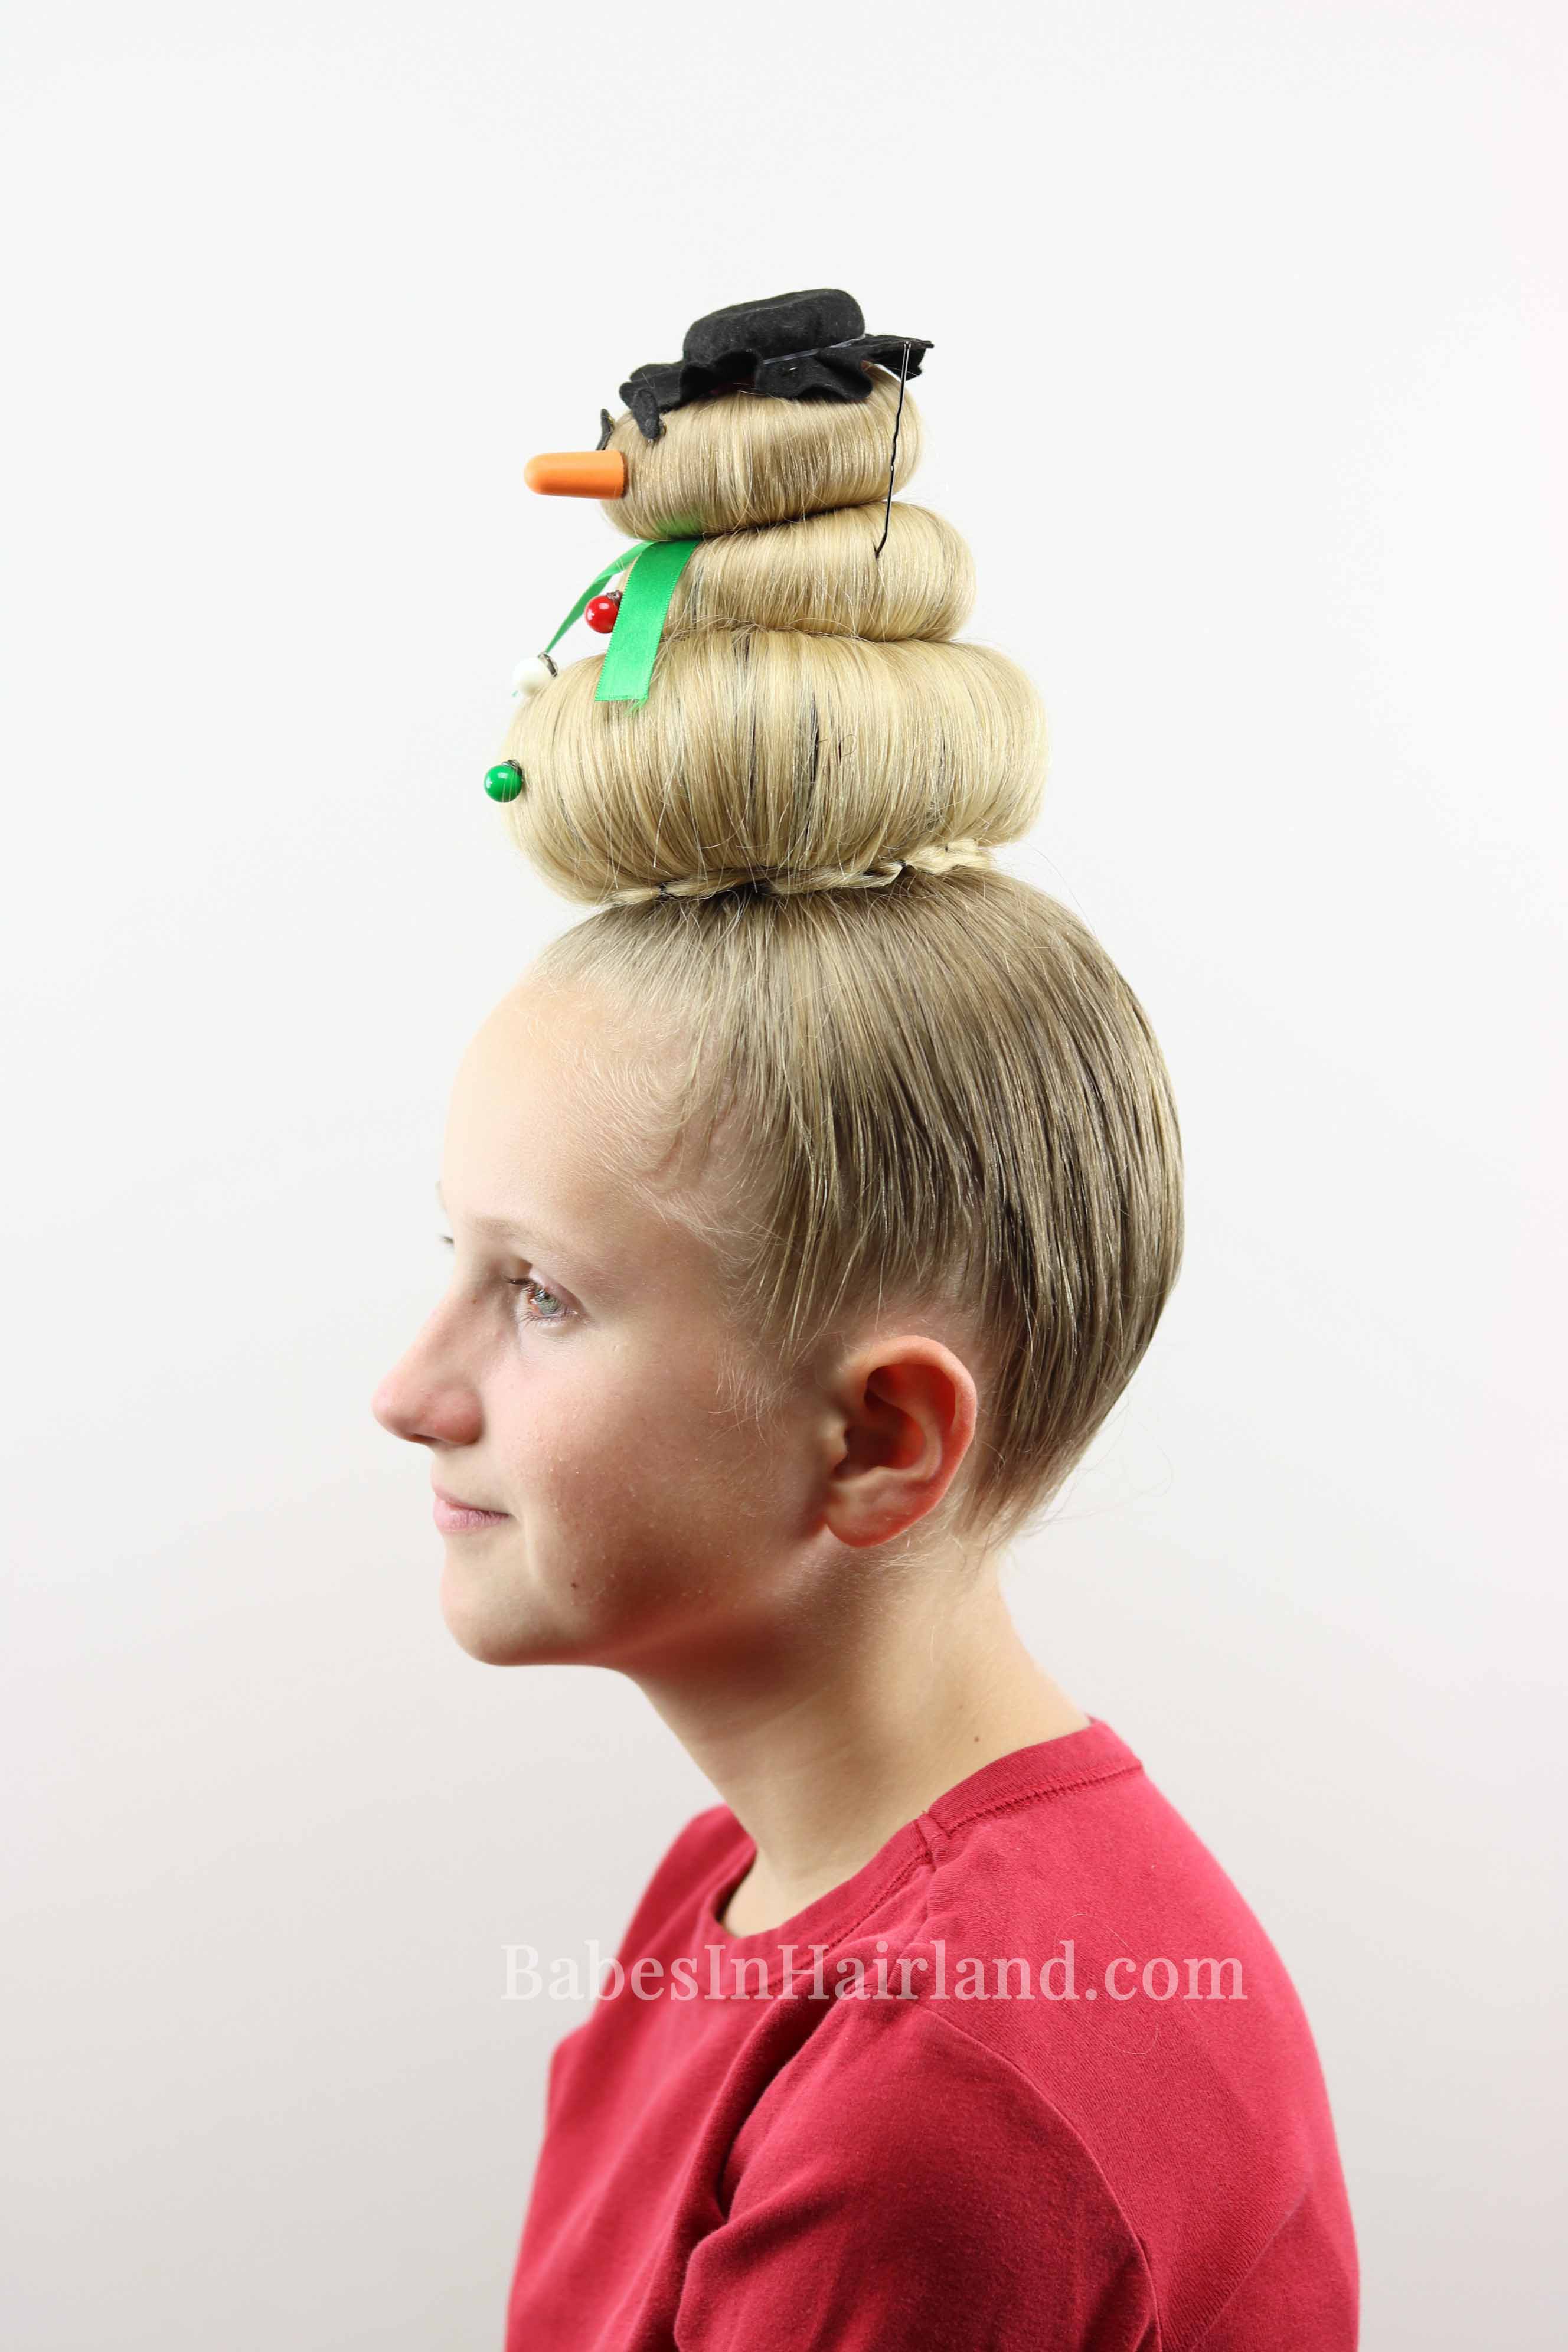 Snowman Hairstyle For Crazy Hair Day Or Christmas